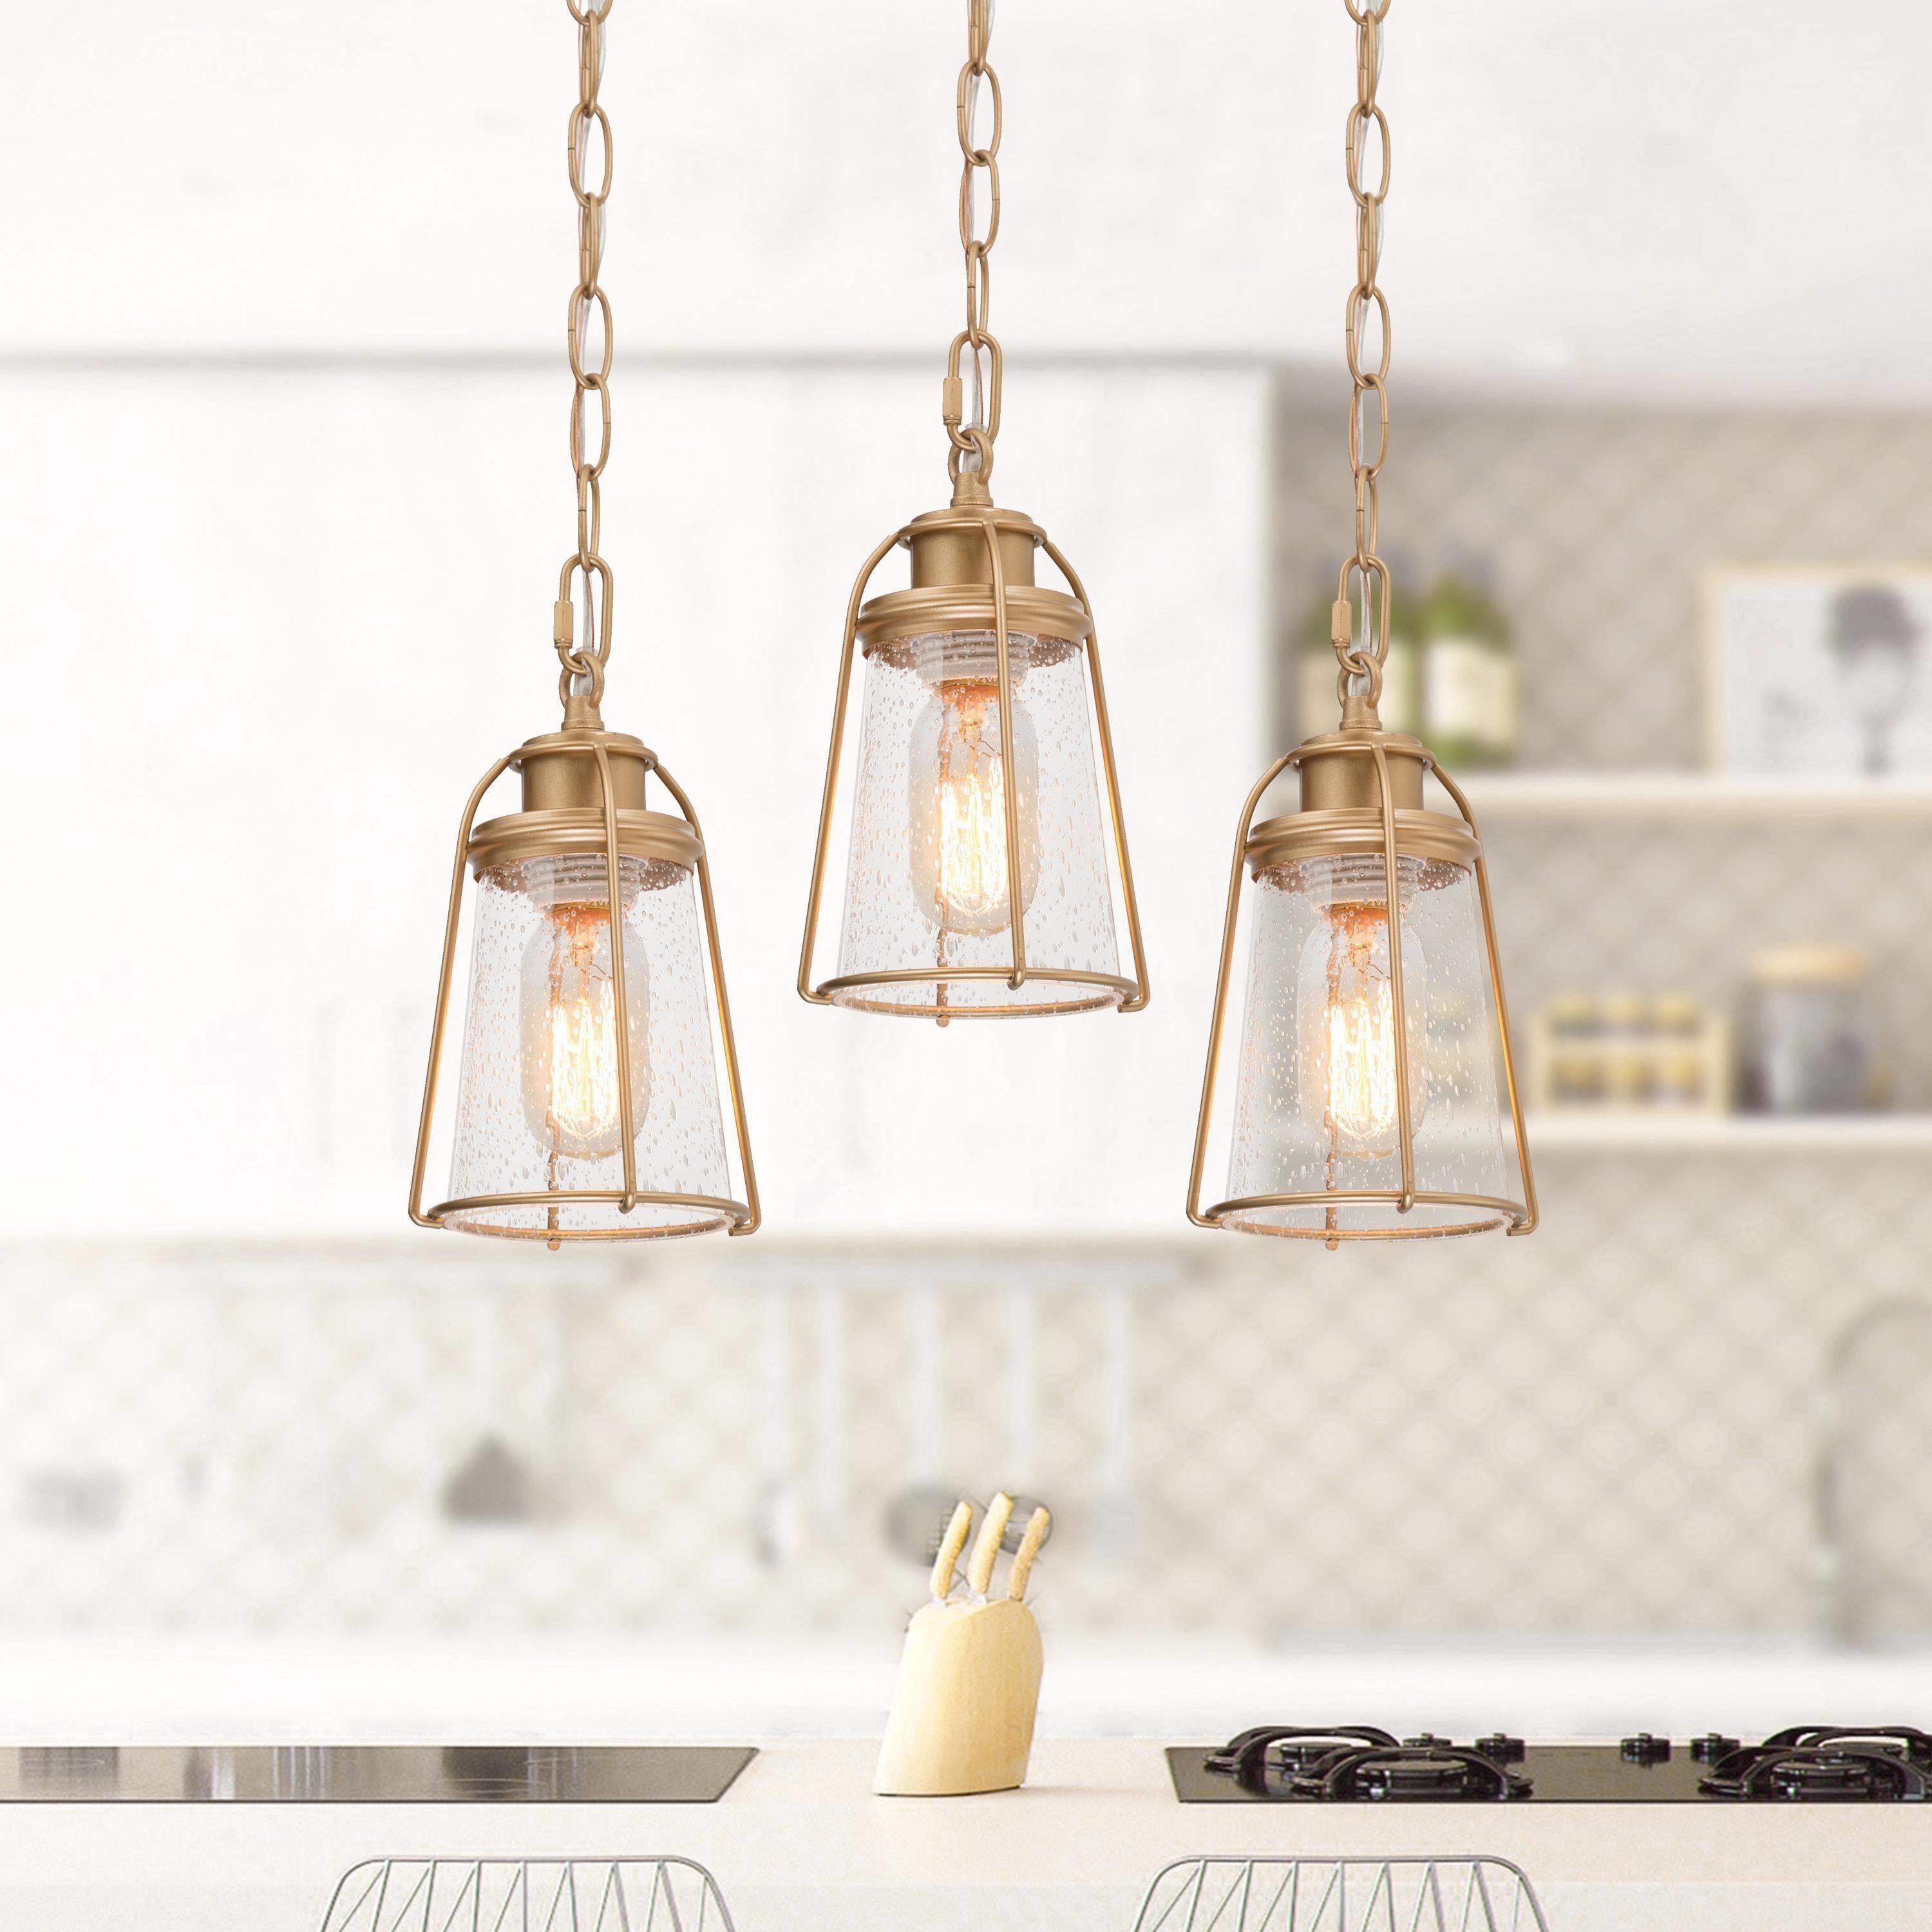 Seeded Matte Pendant Glass Light the Hanging Kitchen Glass at Seeded Lantern Lighting LED in Modern/Contemporary Shade and Uolfin Island Gold Mini department